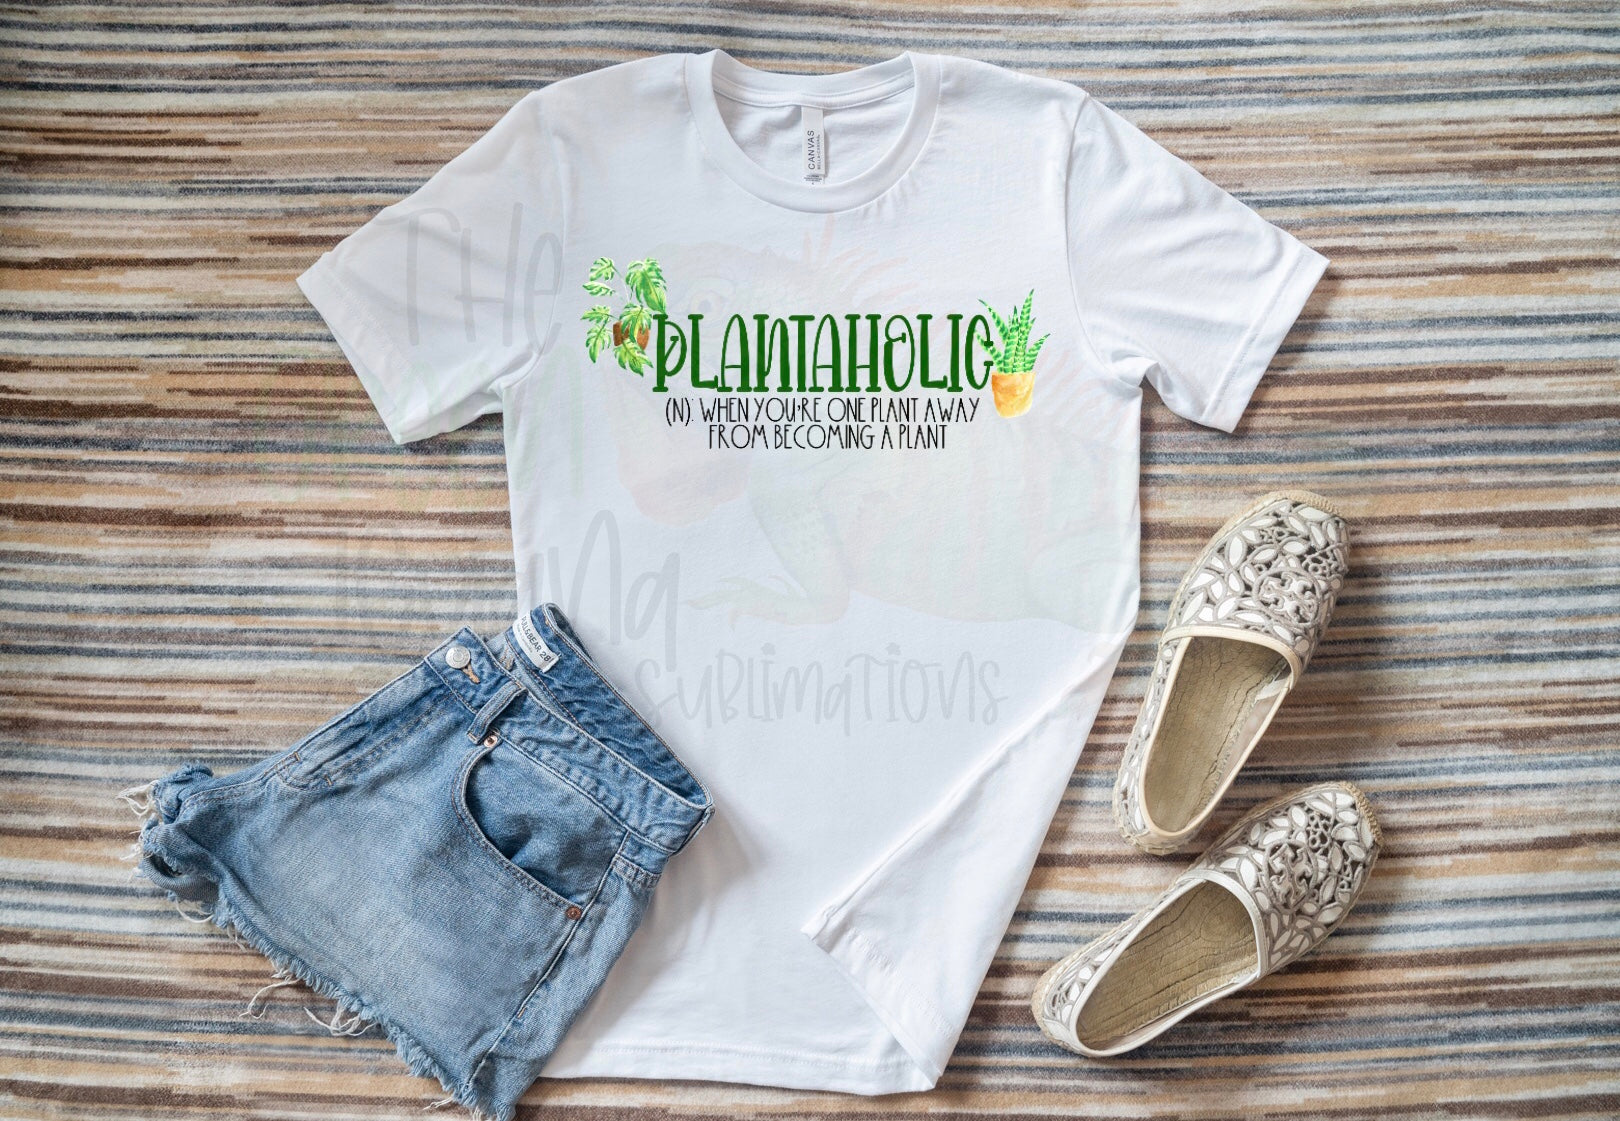 Plantaholic. When you’re one plant away from becoming a plant.